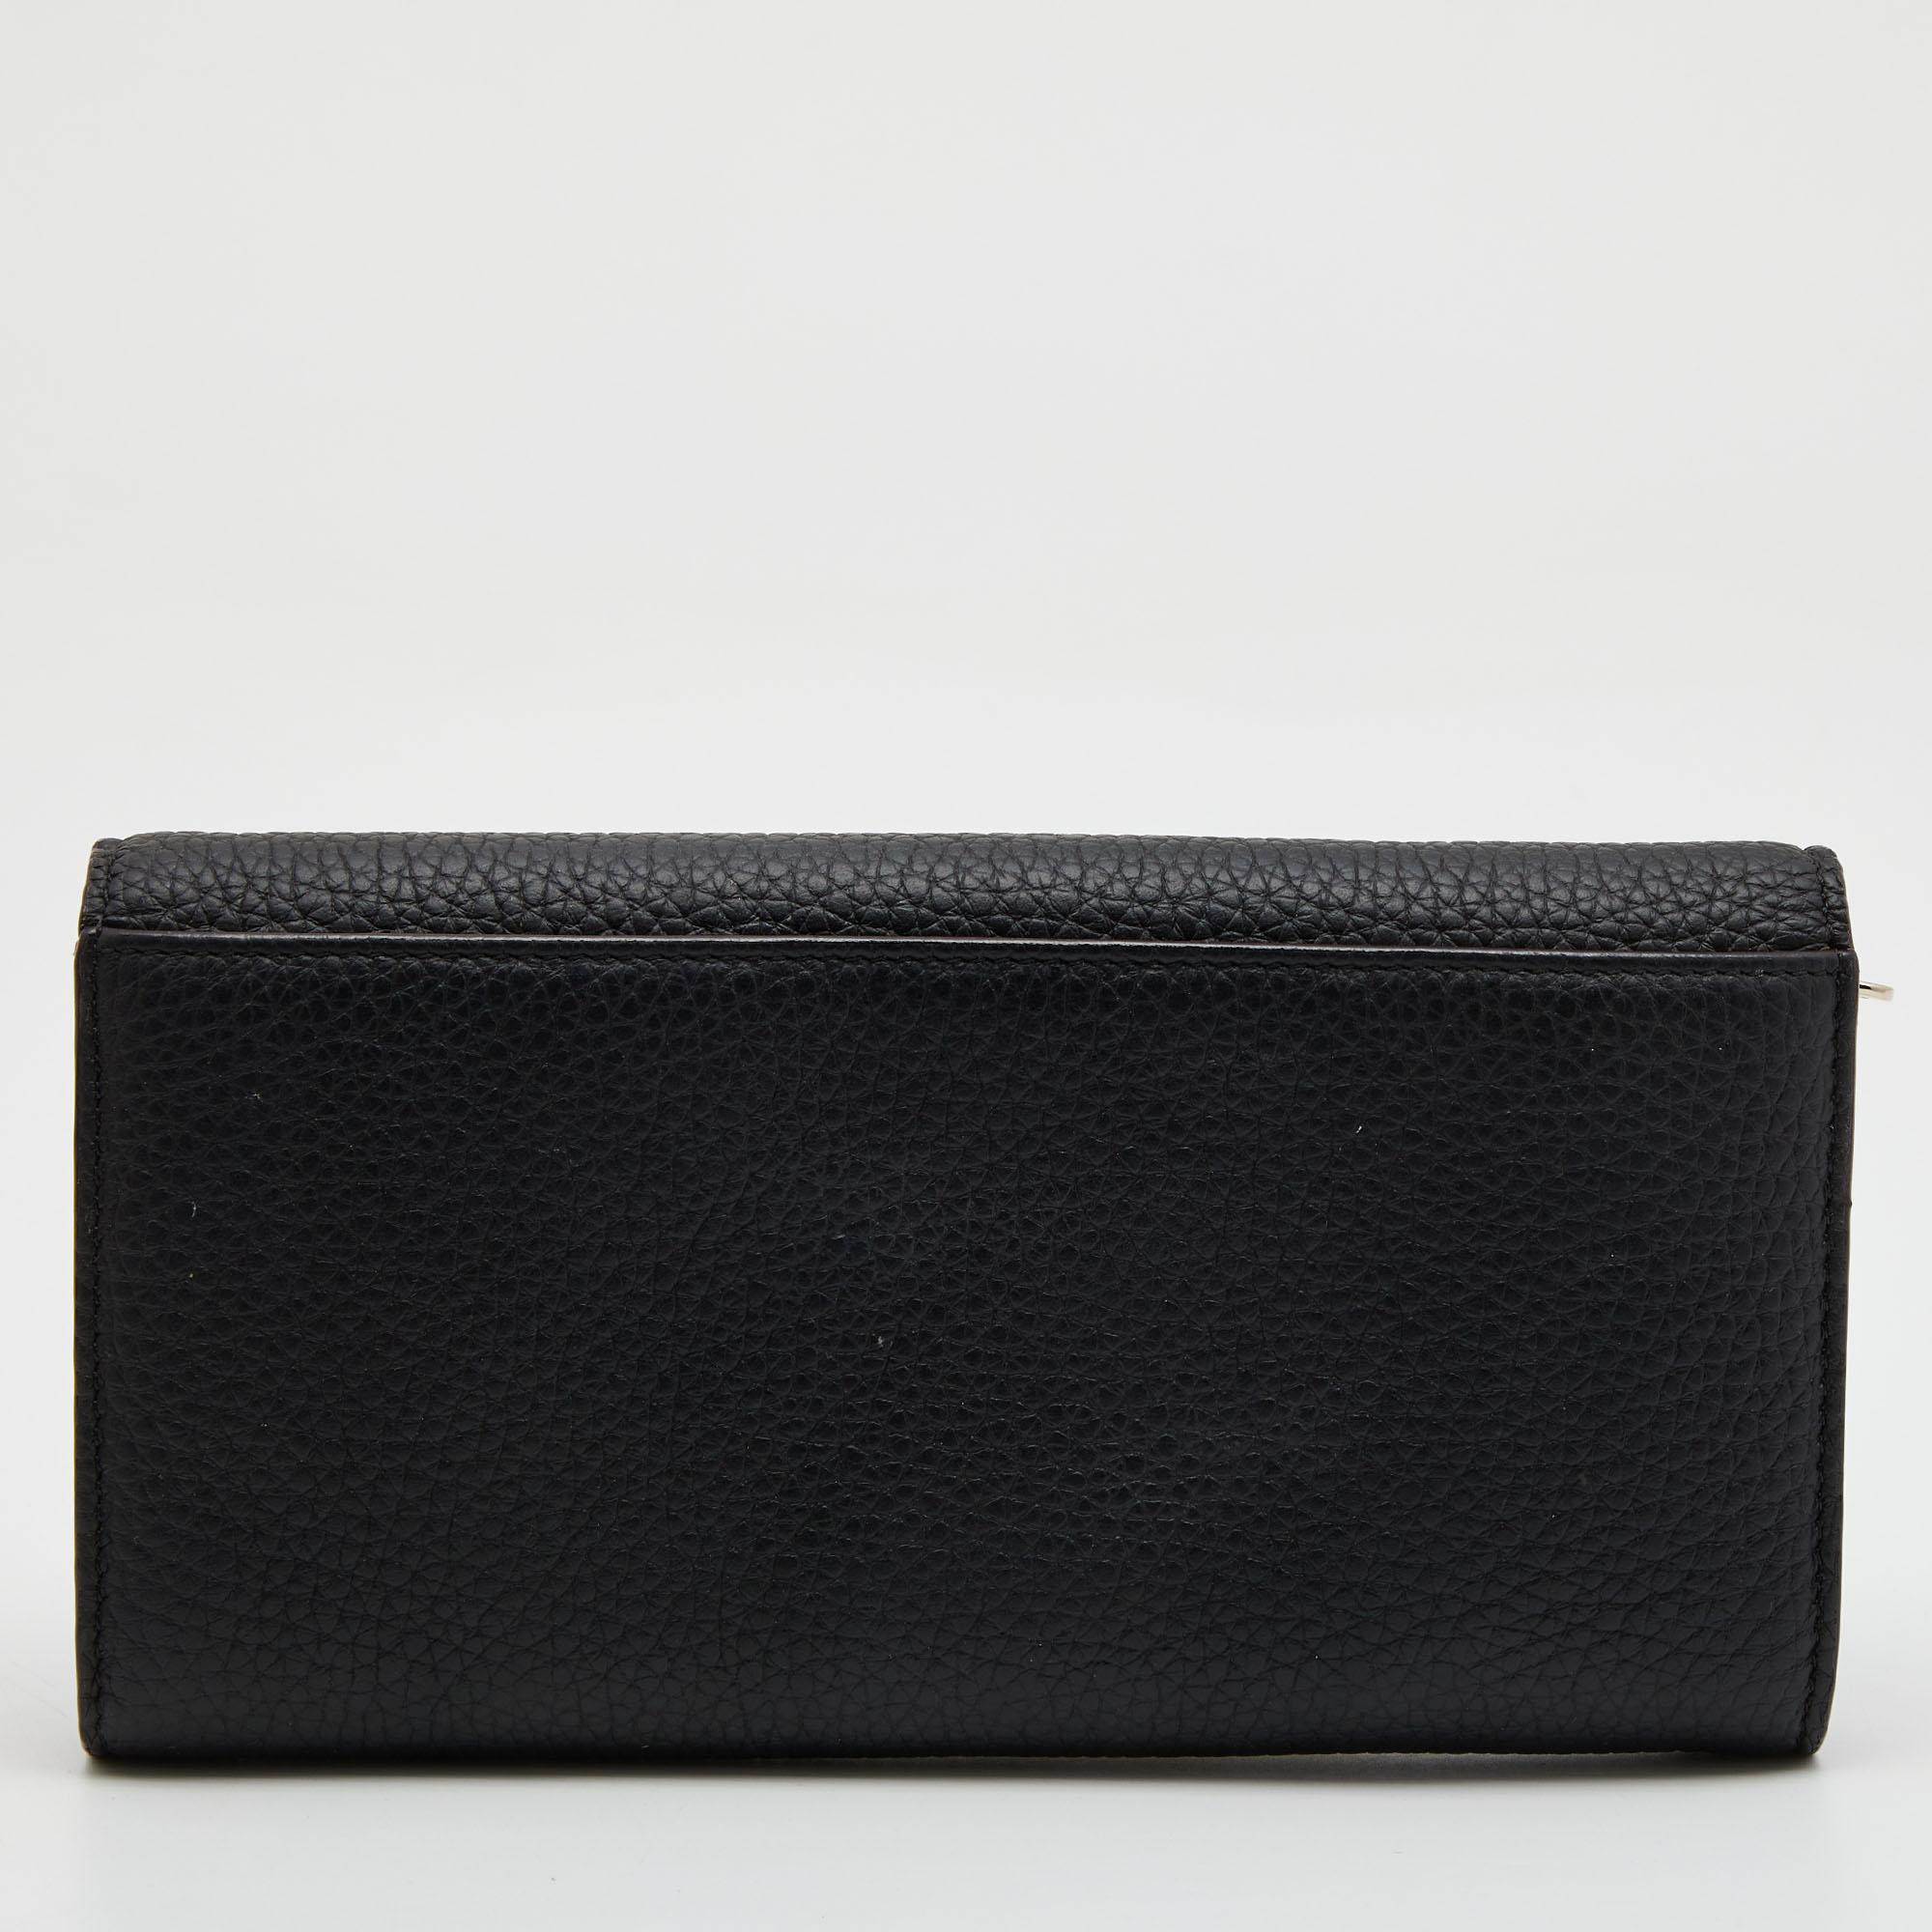 Store your card and cash in a refined way with the compartmentalized interior of this Dior wallet. Made from leather, its front flap is adorned with a gold-tone accent, and its functional design makes it easy to carry around.

